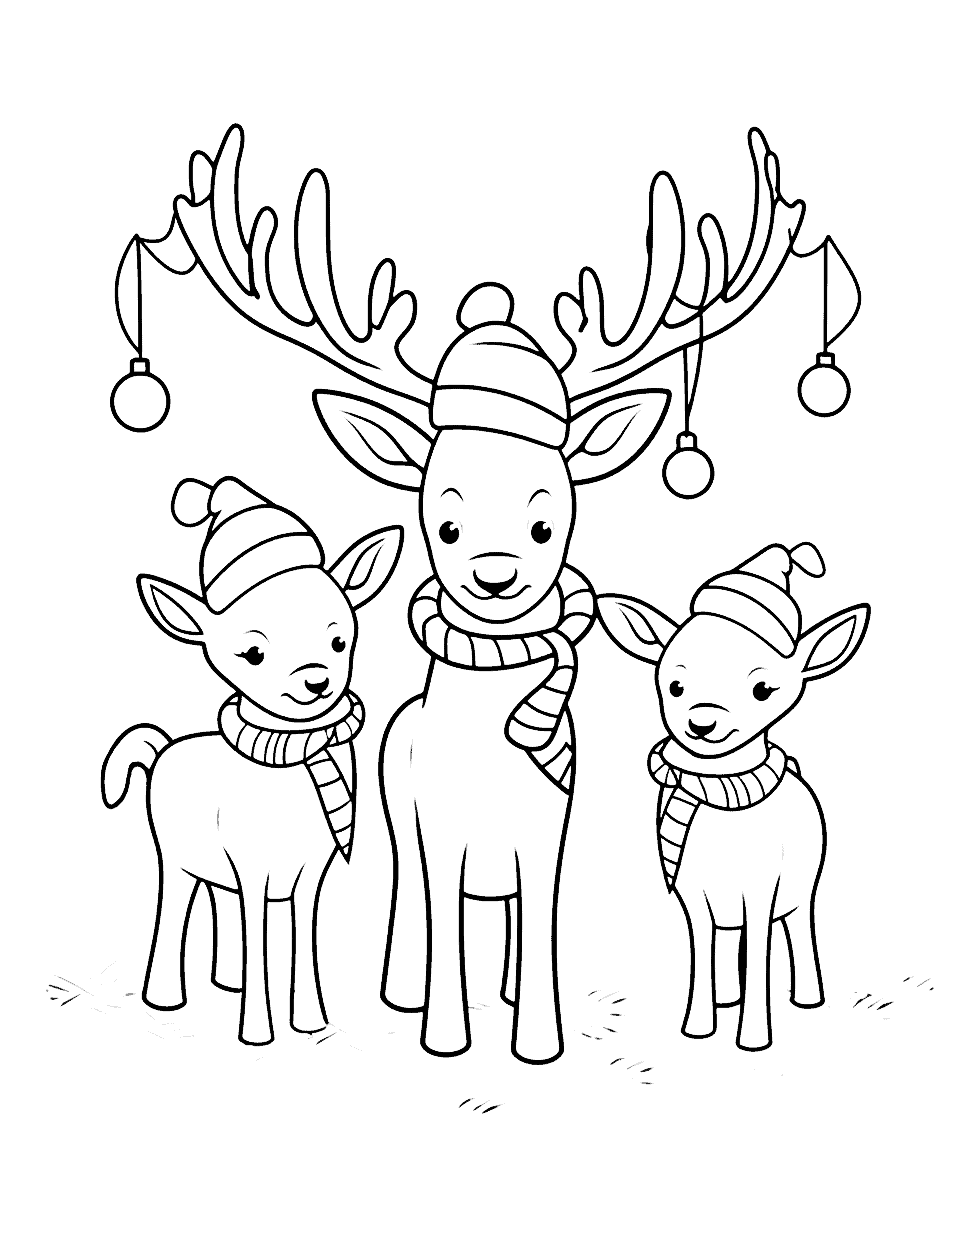 Cute Reindeer Family Christmas Coloring Page - A family of cute reindeer with Christmas decorations on their antlers.